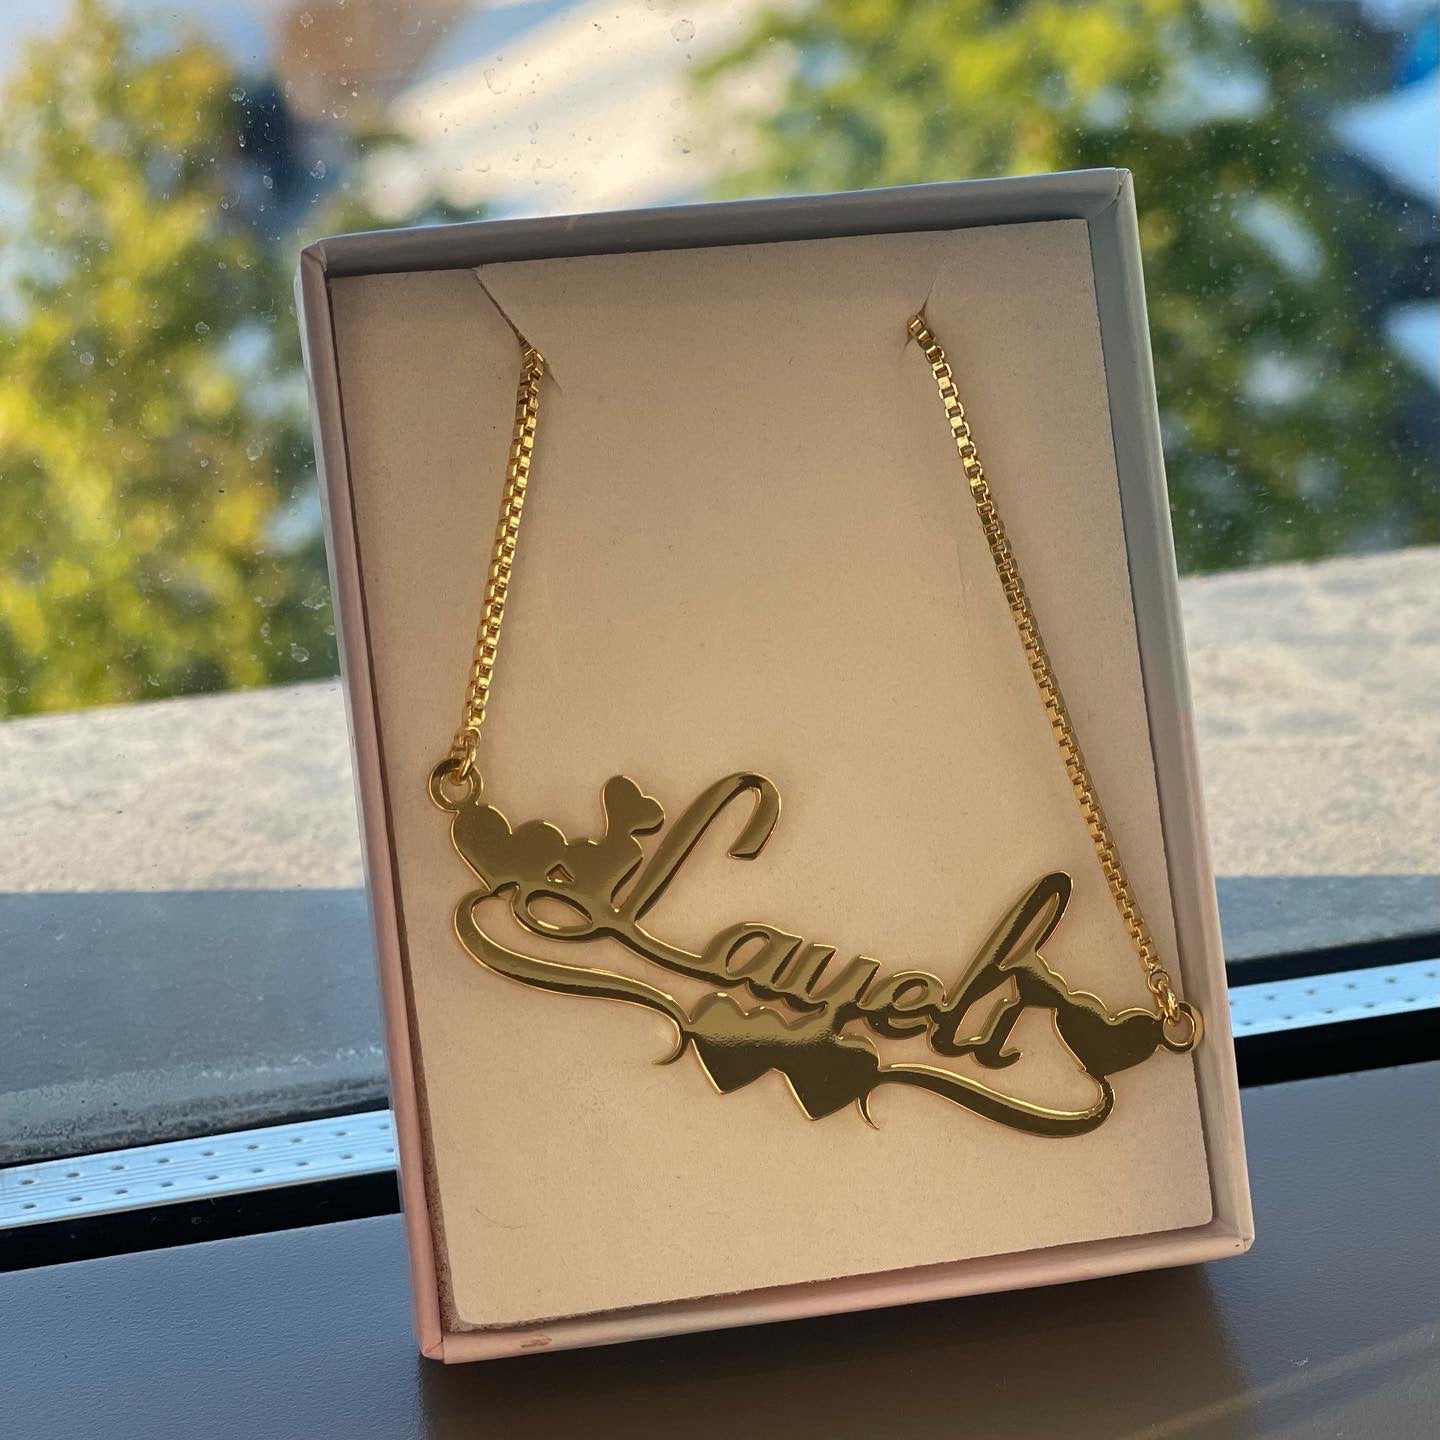 name necklace with heart, name necklace with crown, gold plated name necklace, name necklace for children, name necklace that can get wet, silver namplate, rosegold nameplate, customize font for name necklace, buy name necklace here, 